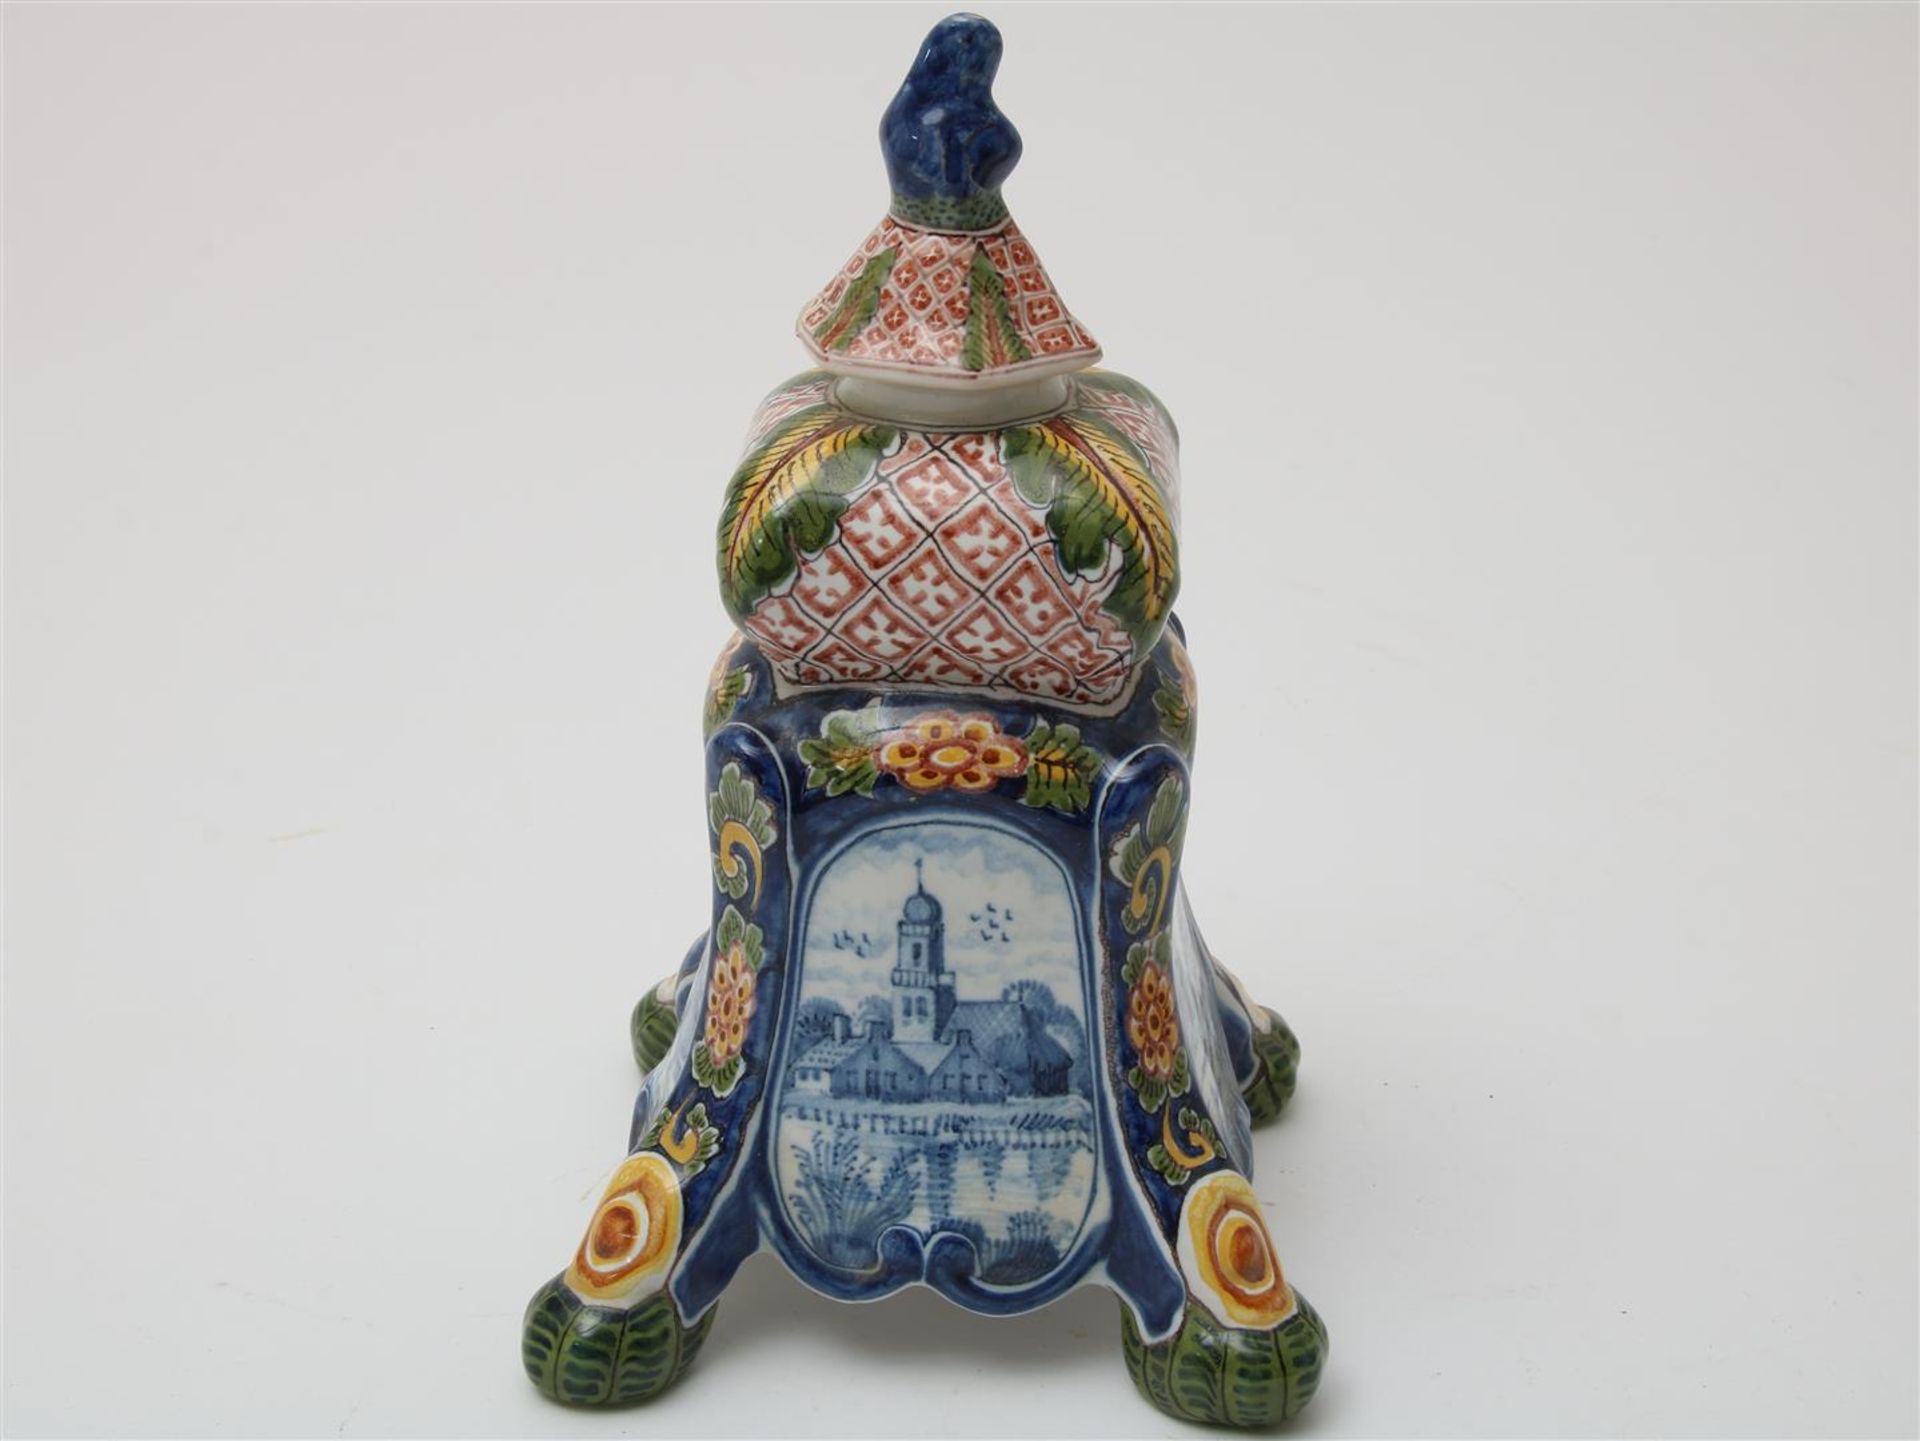 Lot of a polychrome earthenware candlestick, h. 21 cm., polychrome earthenware tea caddy, h. 13 - Image 2 of 9